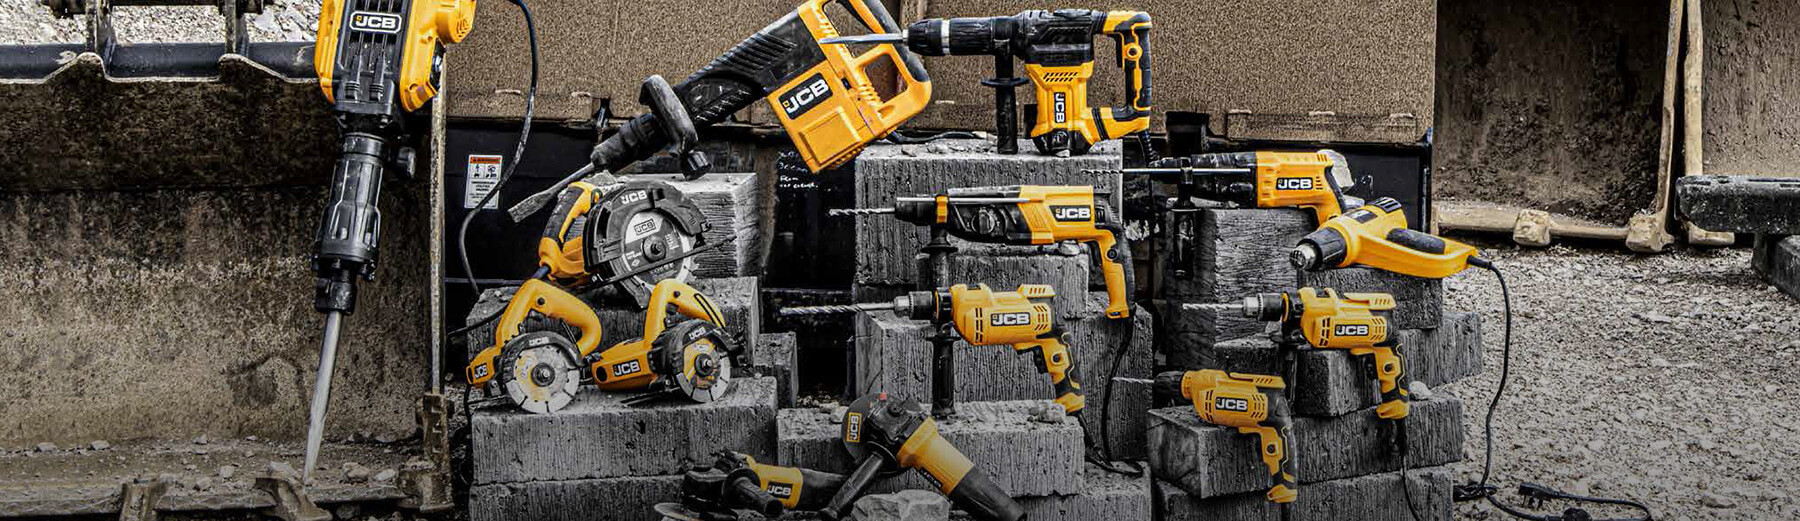 Power tools suppliers in Oman